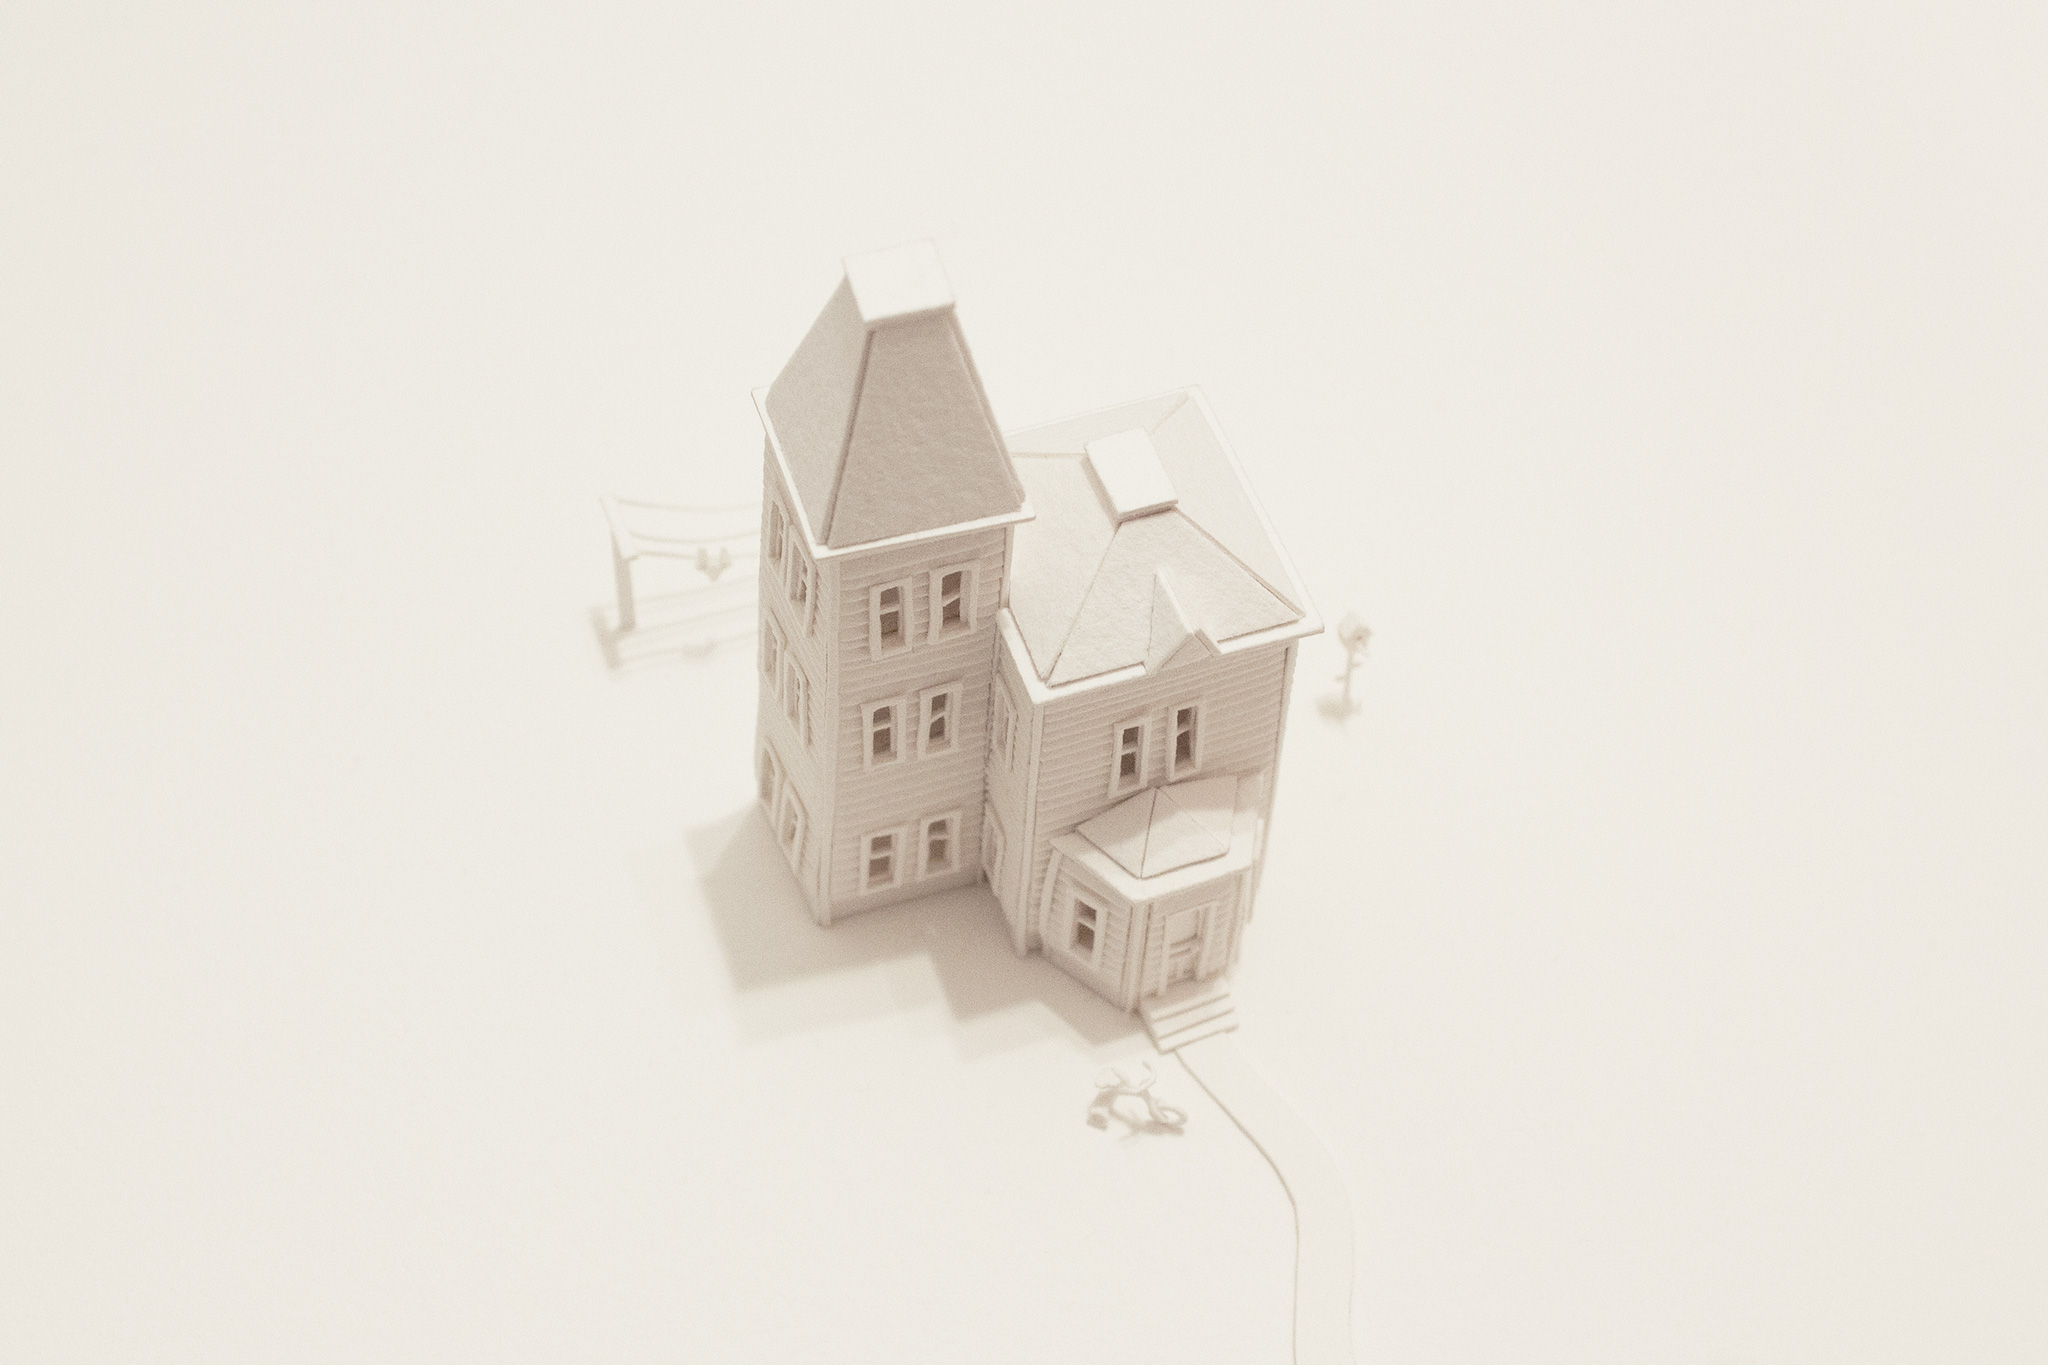 Photo illustration depicting a 3d house made of all white cut paper.